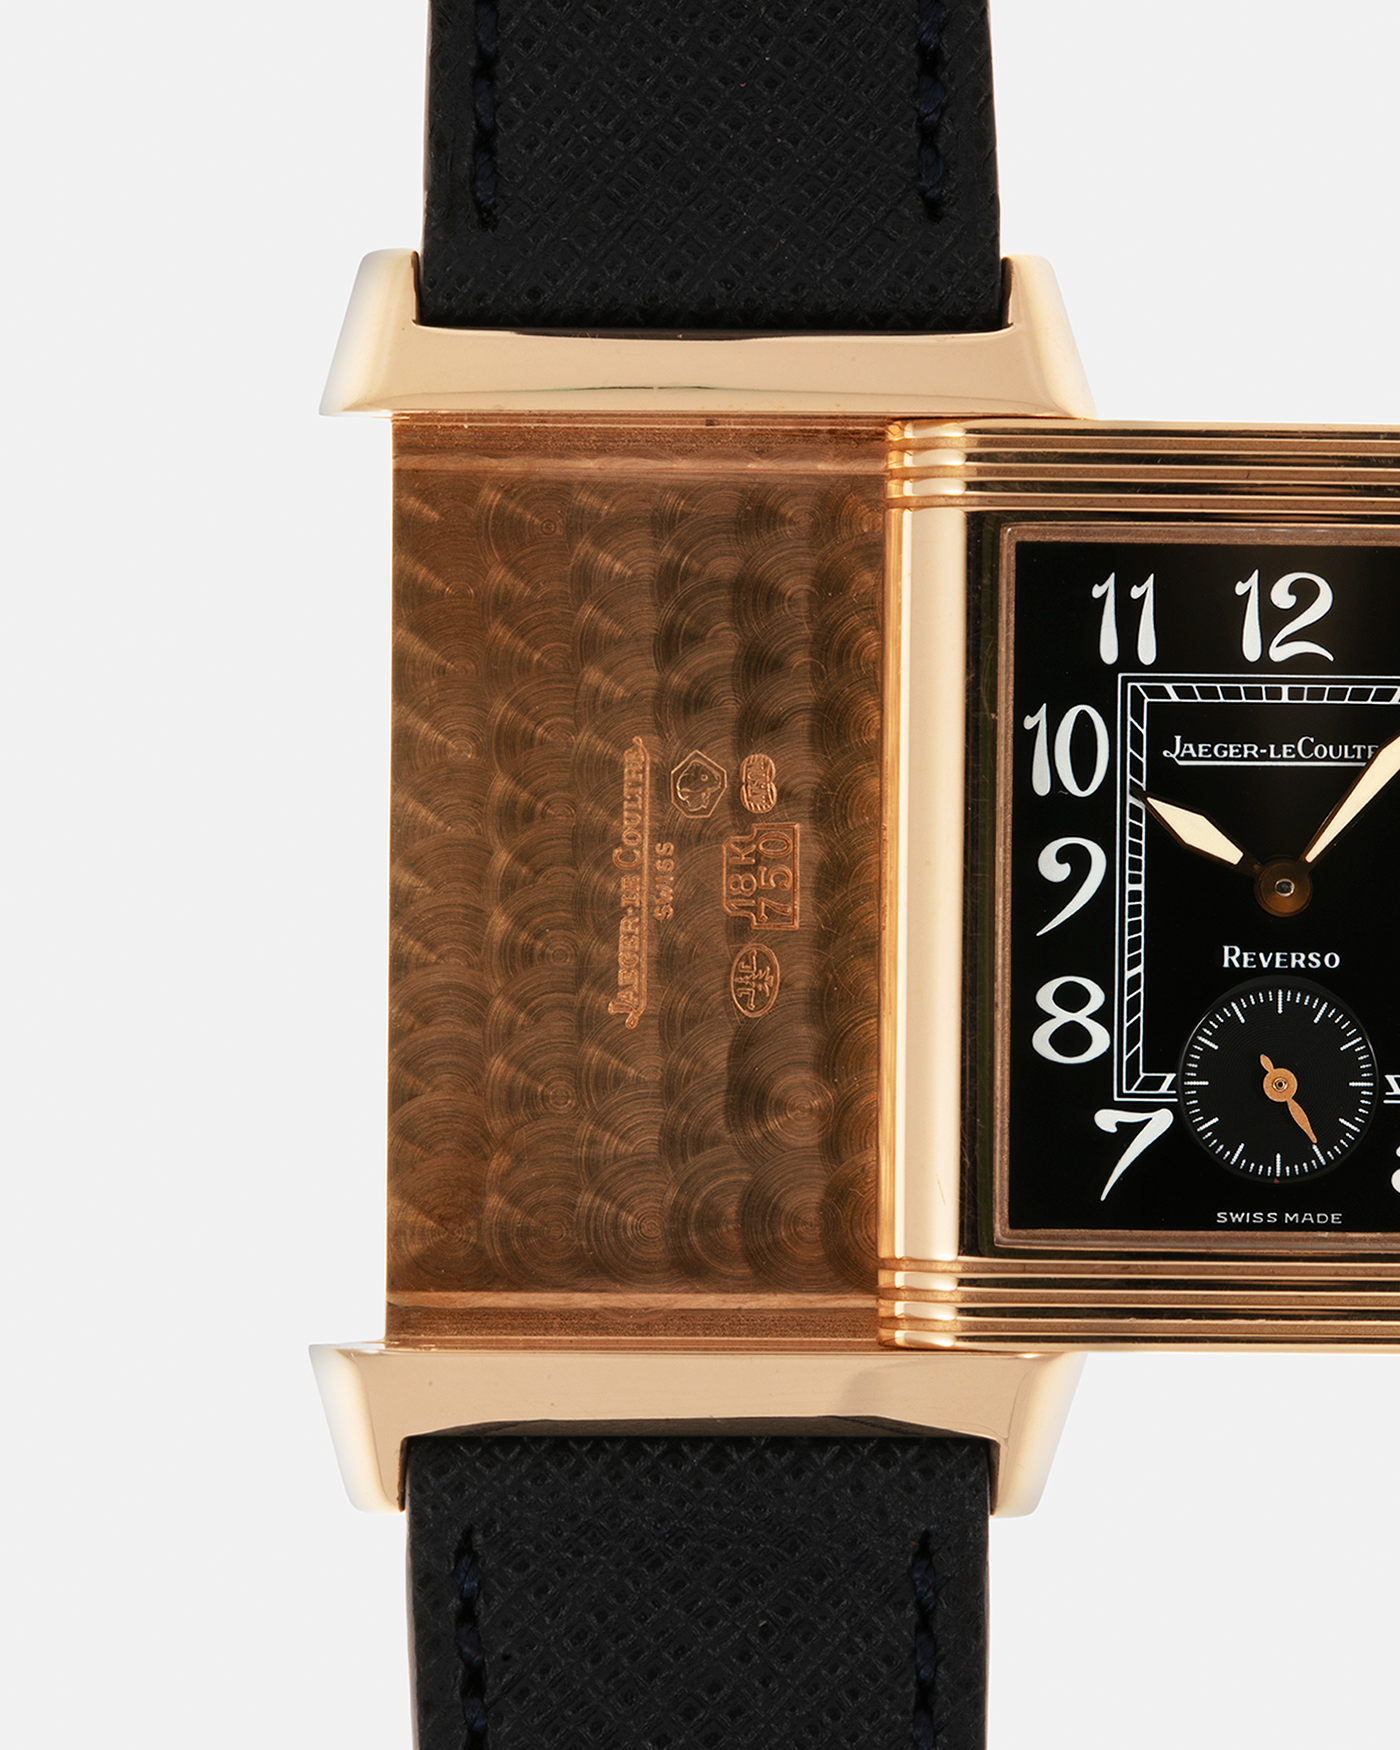 Brand: Jaeger LeCoultre Year: 2010s Model: Reverso Grand Taille ‘Art Deco‘ Reference: 270.2.62 Material: 18-carat Rose Gold Movement: Jaeger LeCoultre Cal. 822, Manual-Wind Case Diameter: 42mm x 26mm x 9.5mm Lug Width: 19mm Strap: Molequin Oxford Blue Textured Calf Leather Strap with Signed 18-carat Rose Gold Deployant Clasp